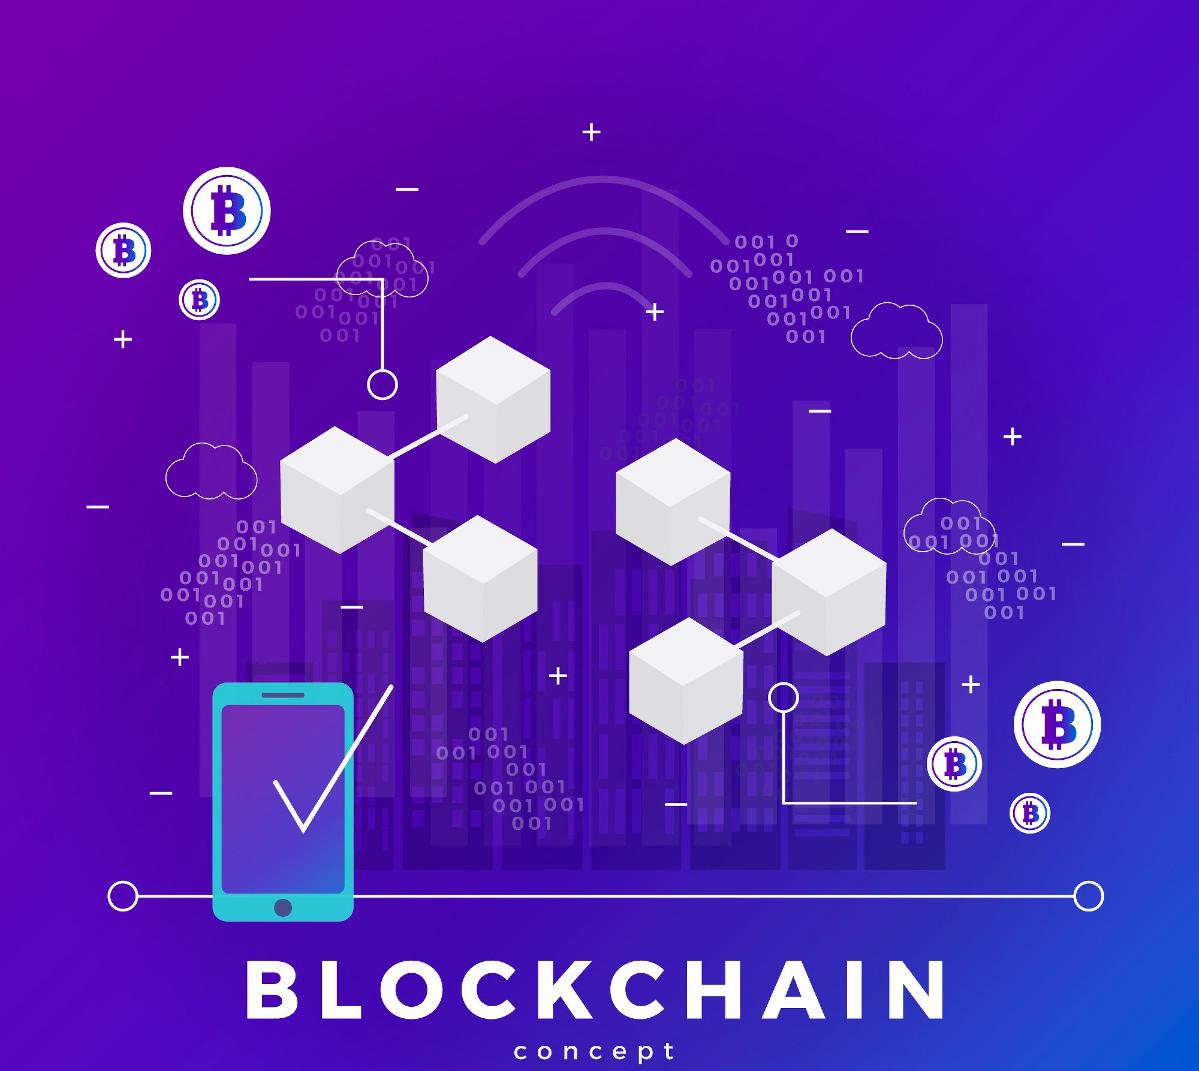 Do you want to know more about Blockchain development?